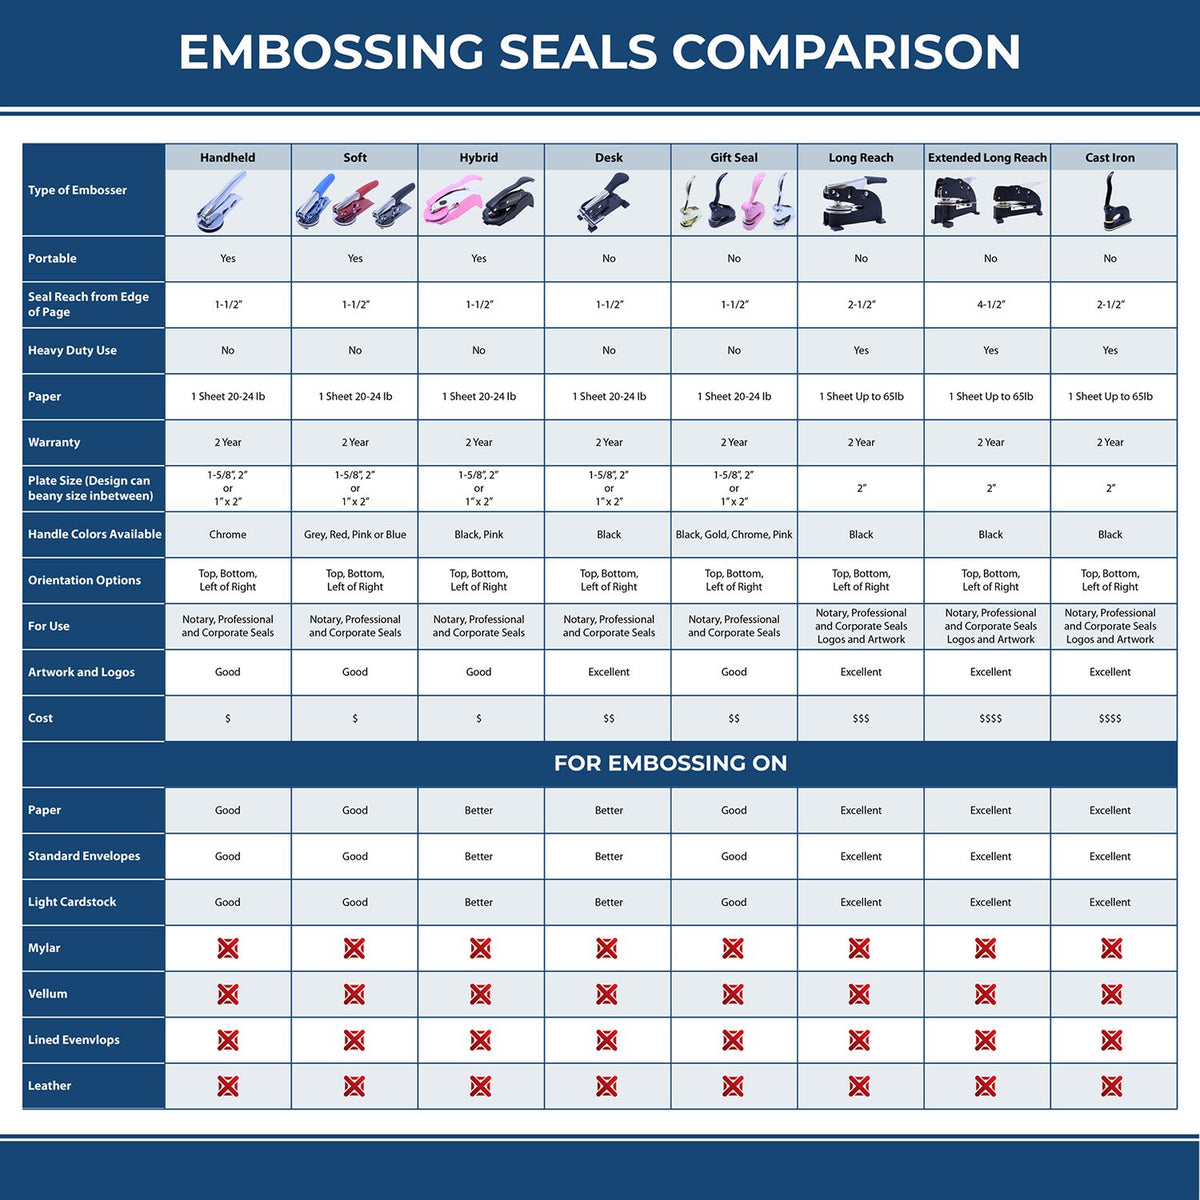 A comparison chart for the different types of mount models available for the Hybrid Montana Geologist Seal